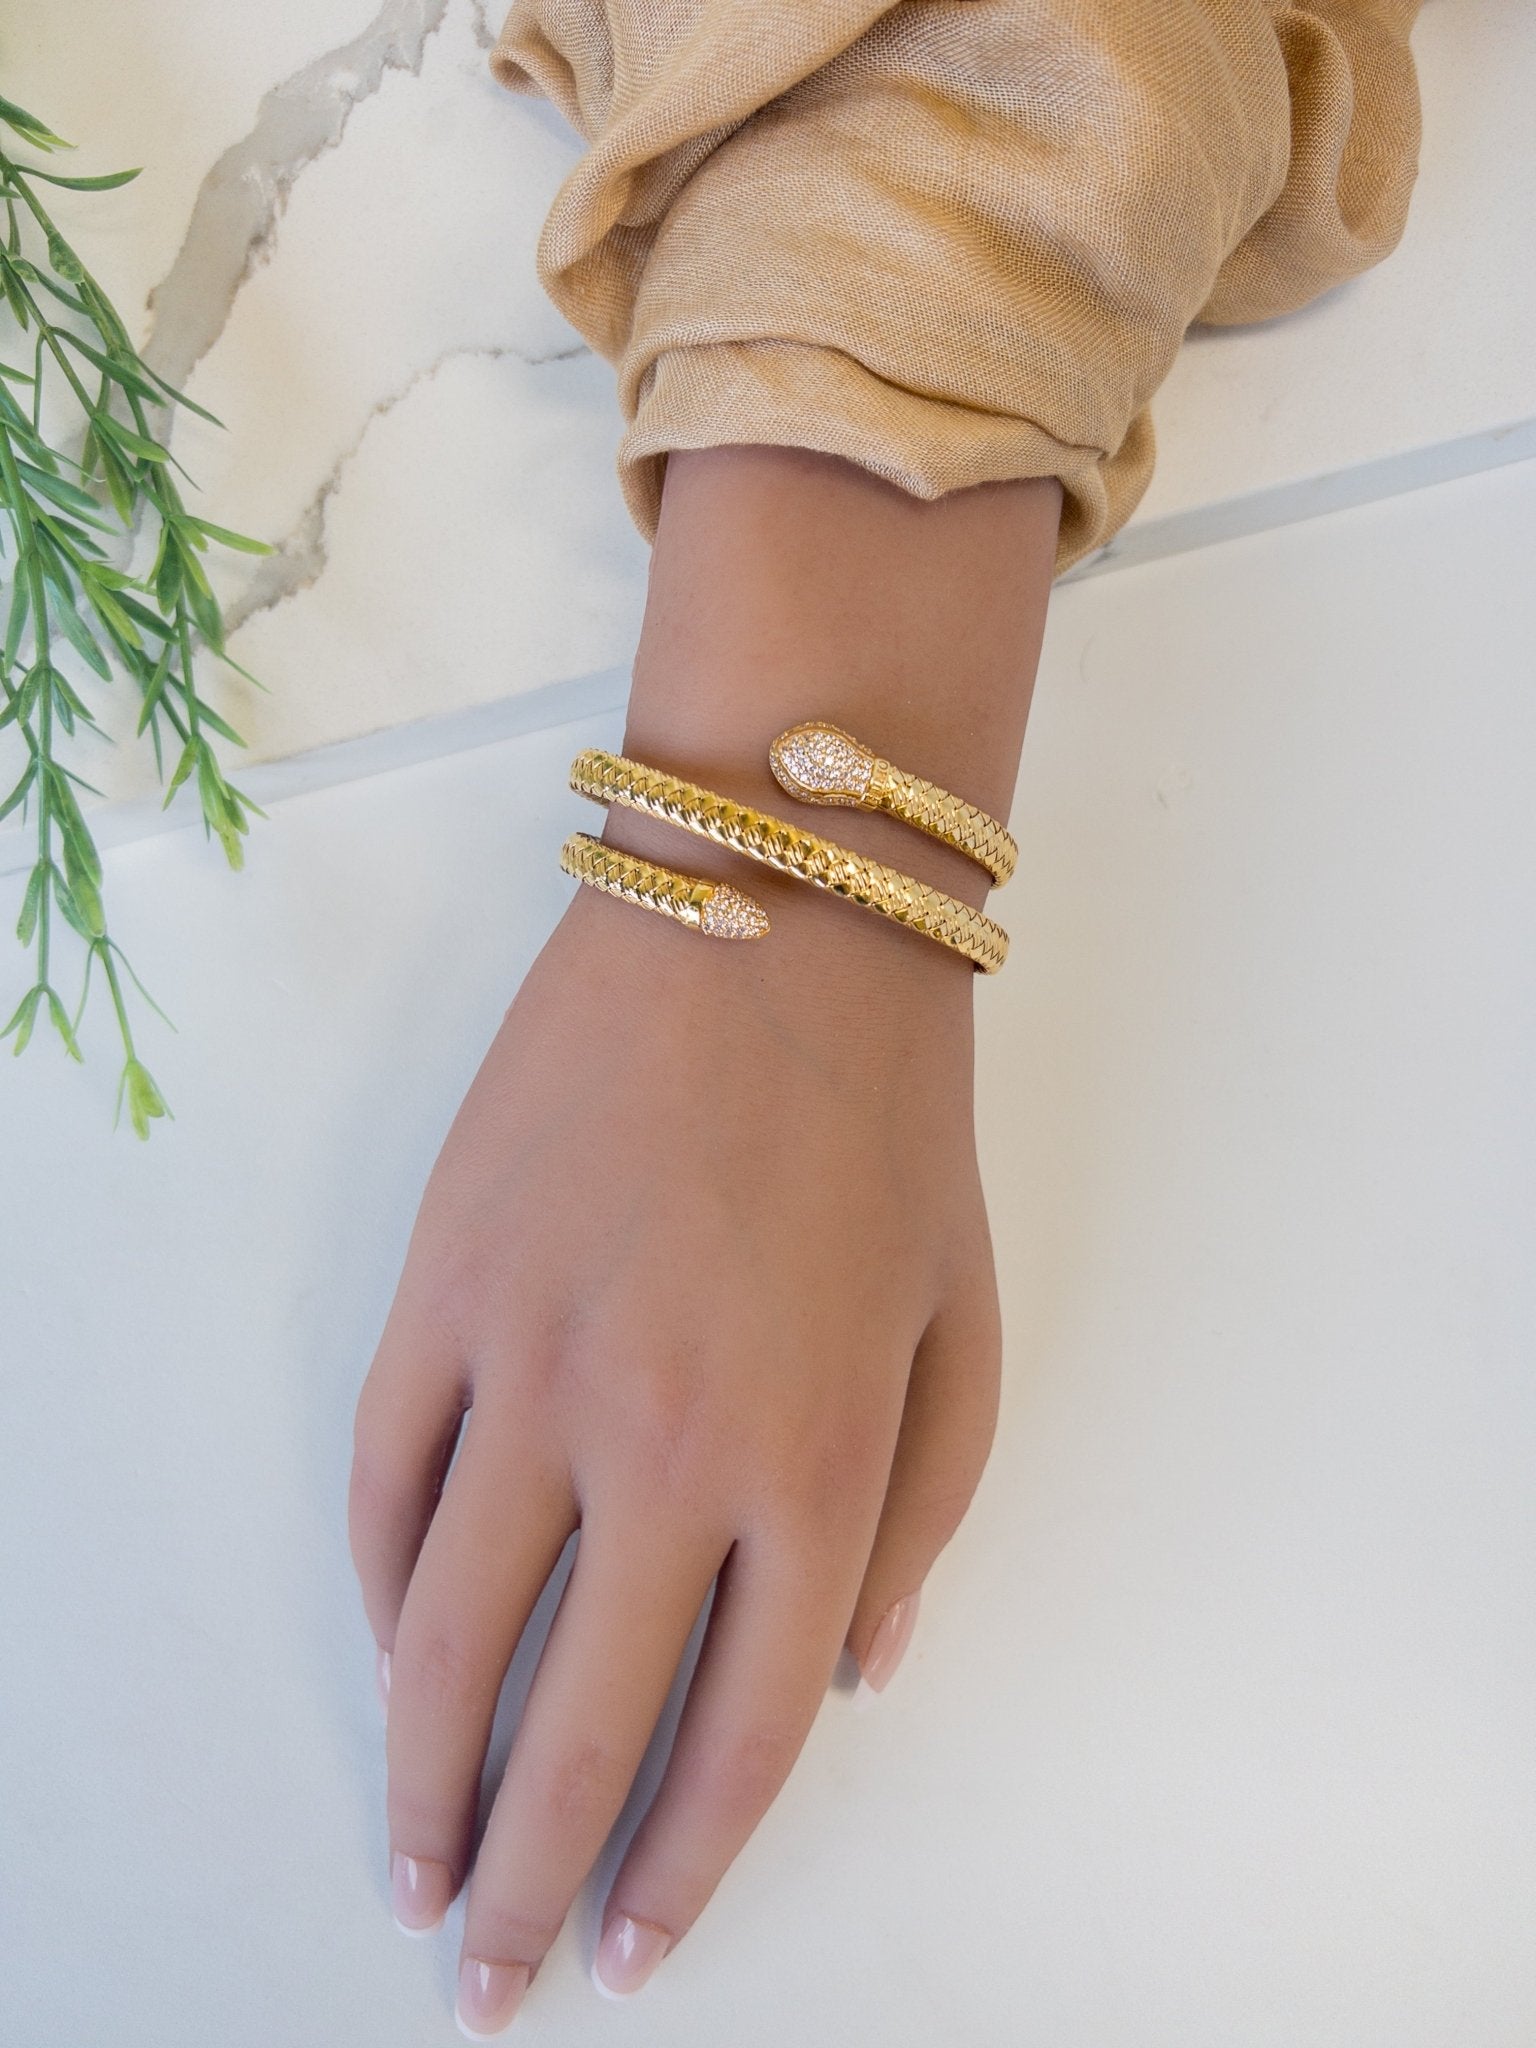 NEW WITH BAG 21K YELLOW GOLD BRACELET 7 INCH LIMITED EDITION | eBay